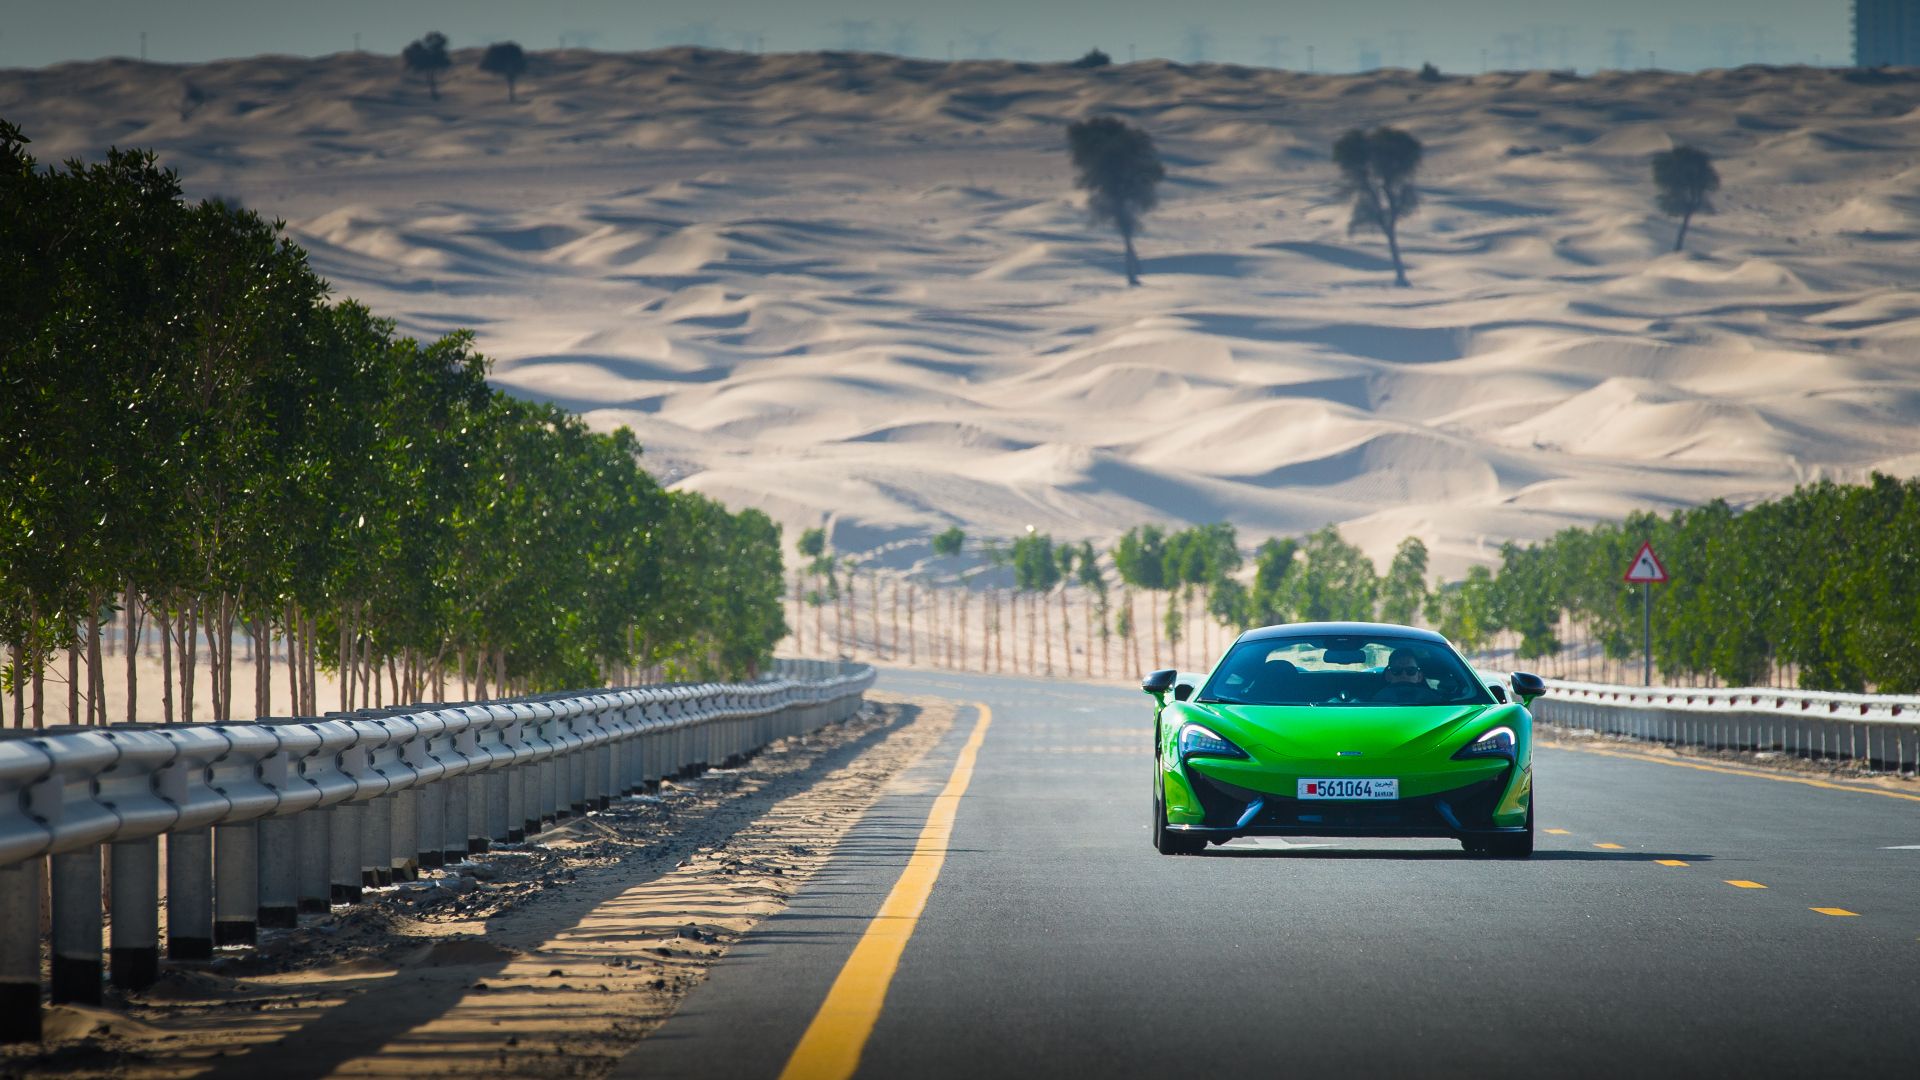 A front shot of a green McLaren 570S driving on the road